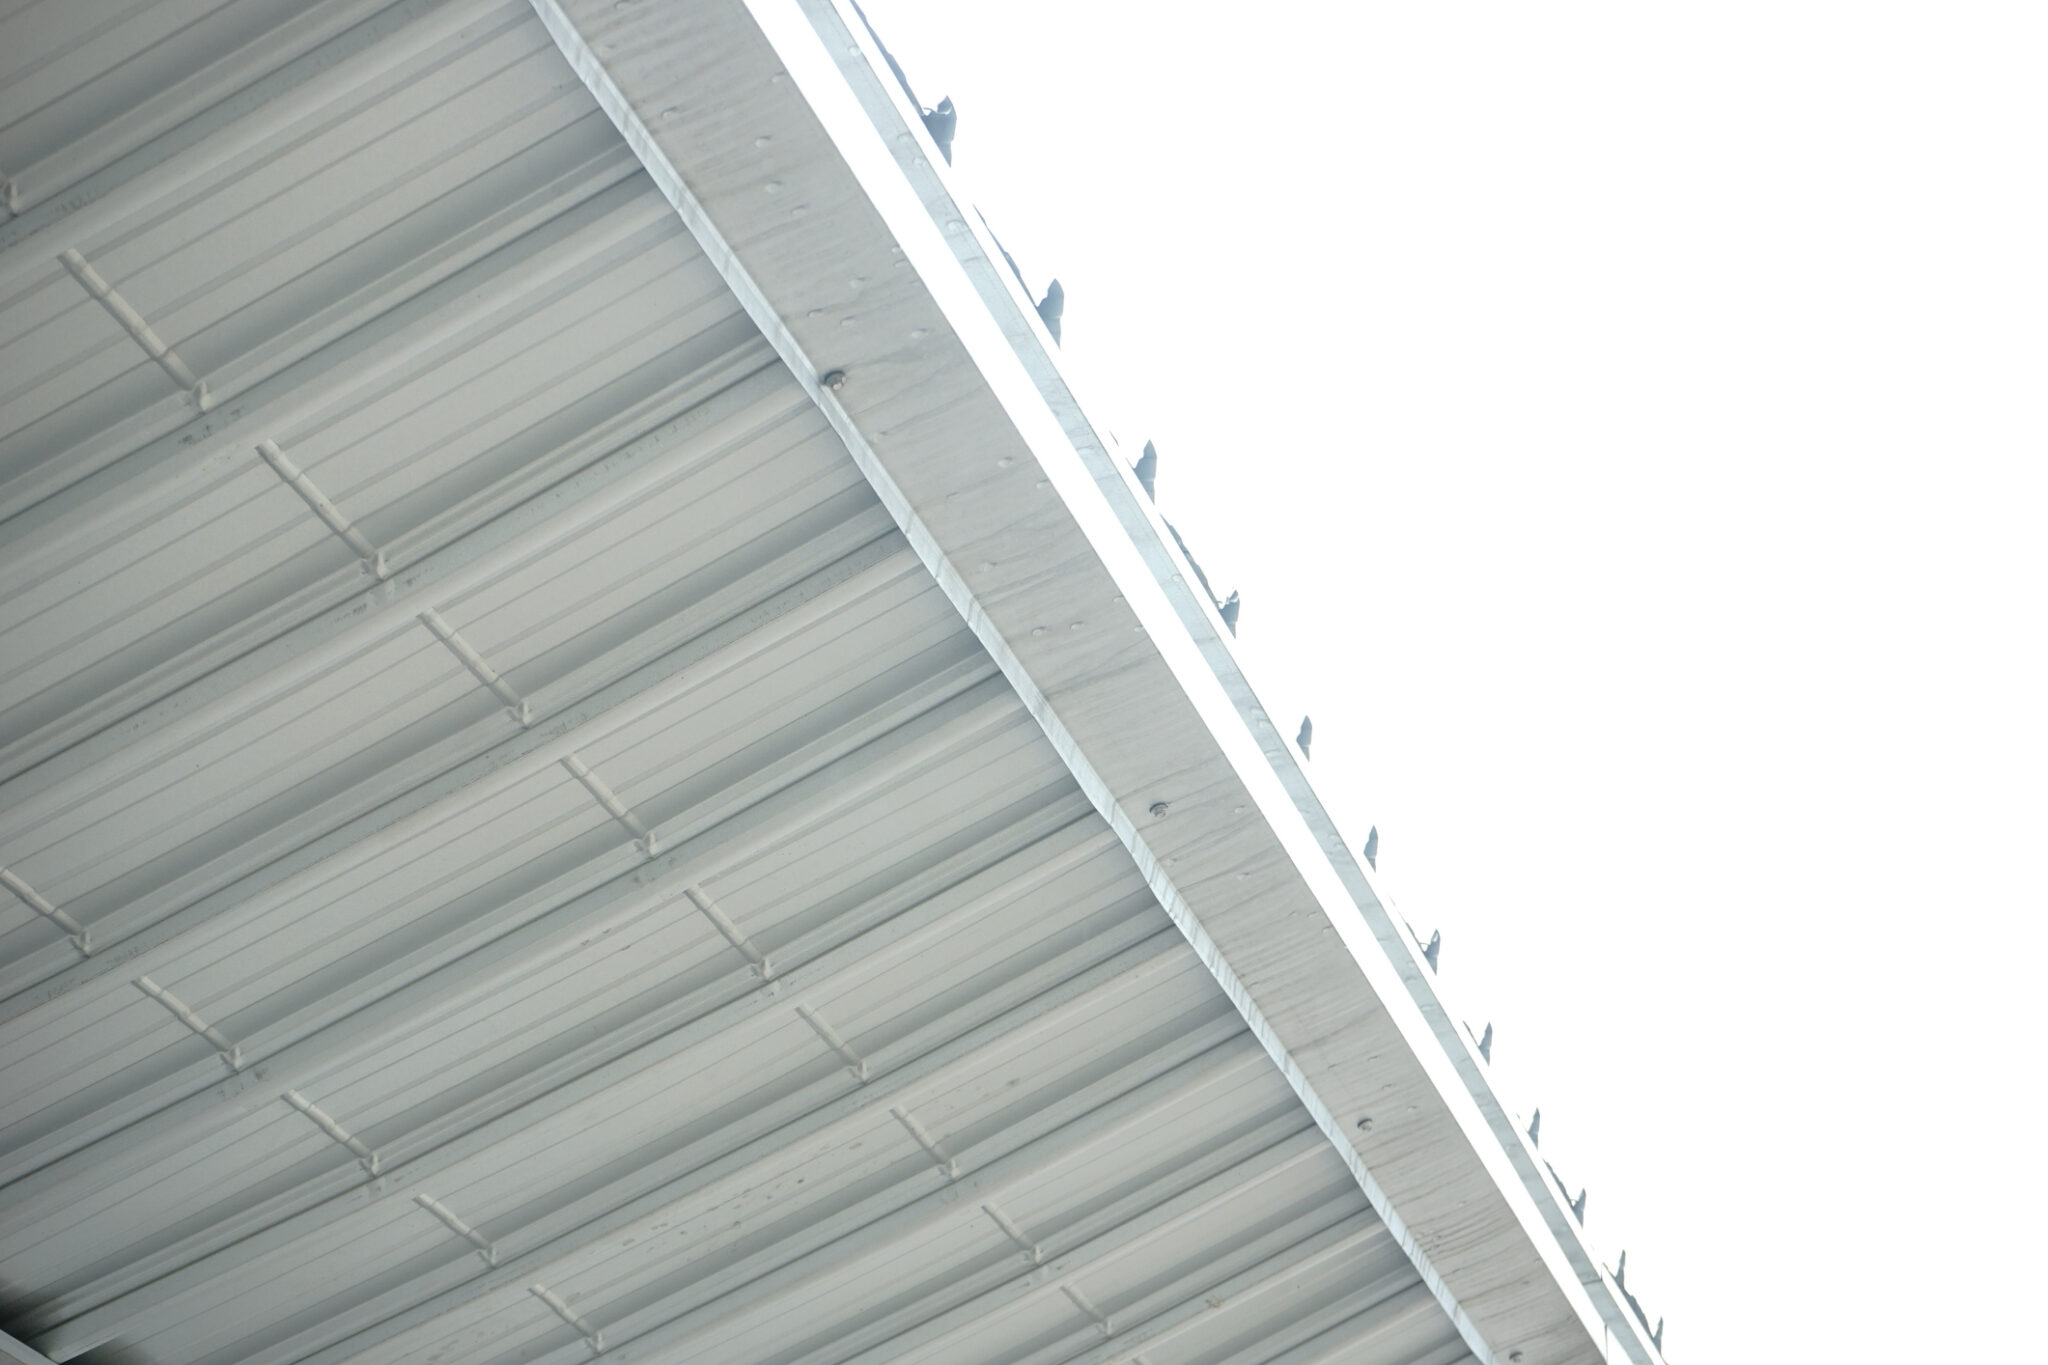 View of underside of gutters and soffit.